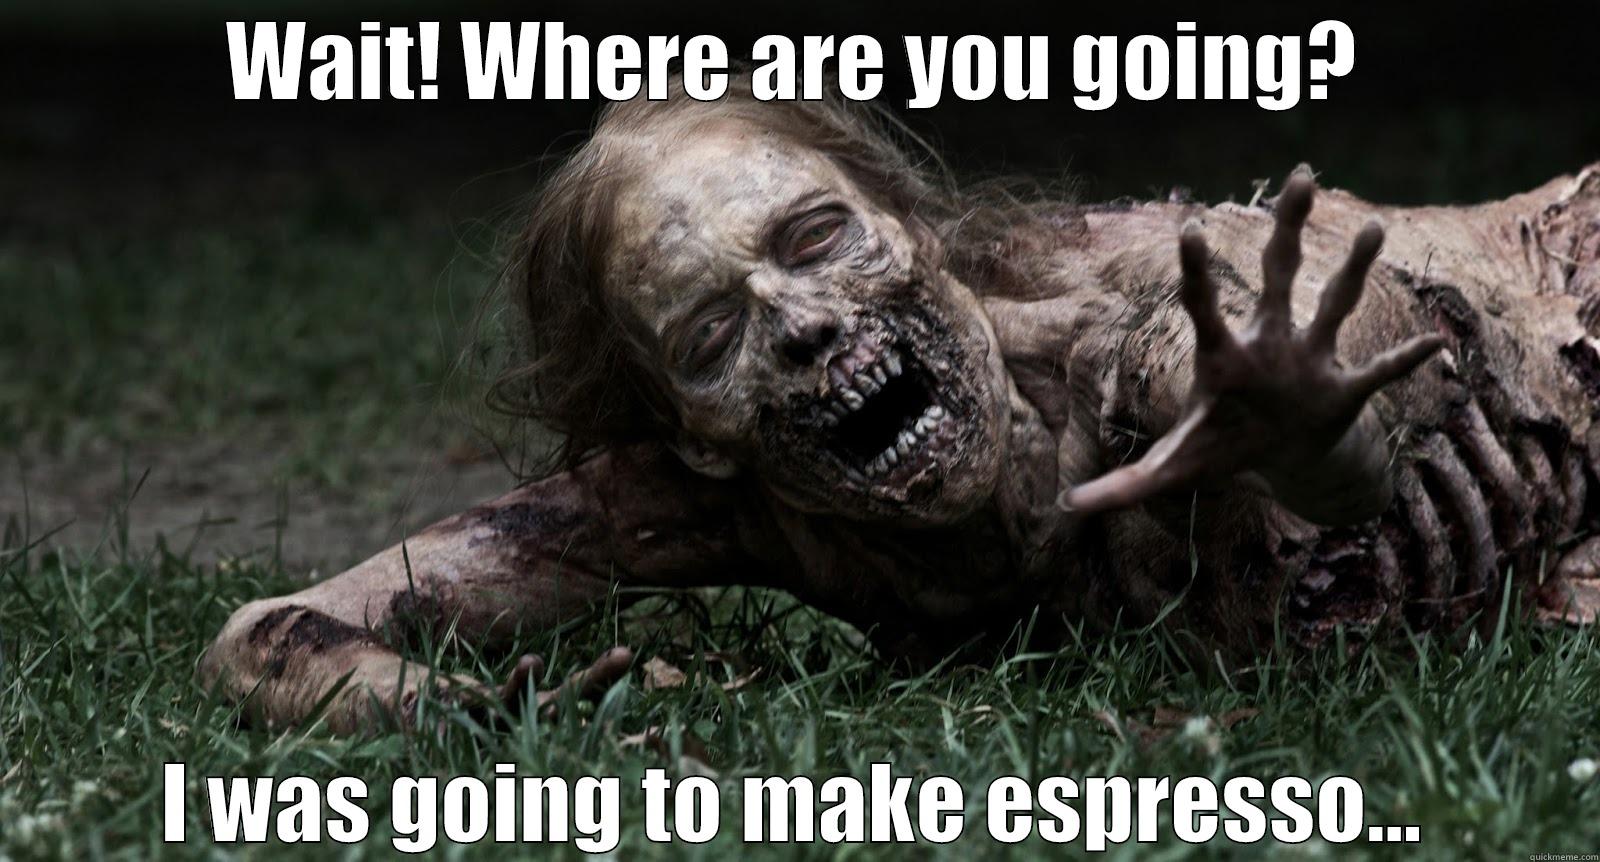 Have an espresso with a zombie - WAIT! WHERE ARE YOU GOING? I WAS GOING TO MAKE ESPRESSO... Misc